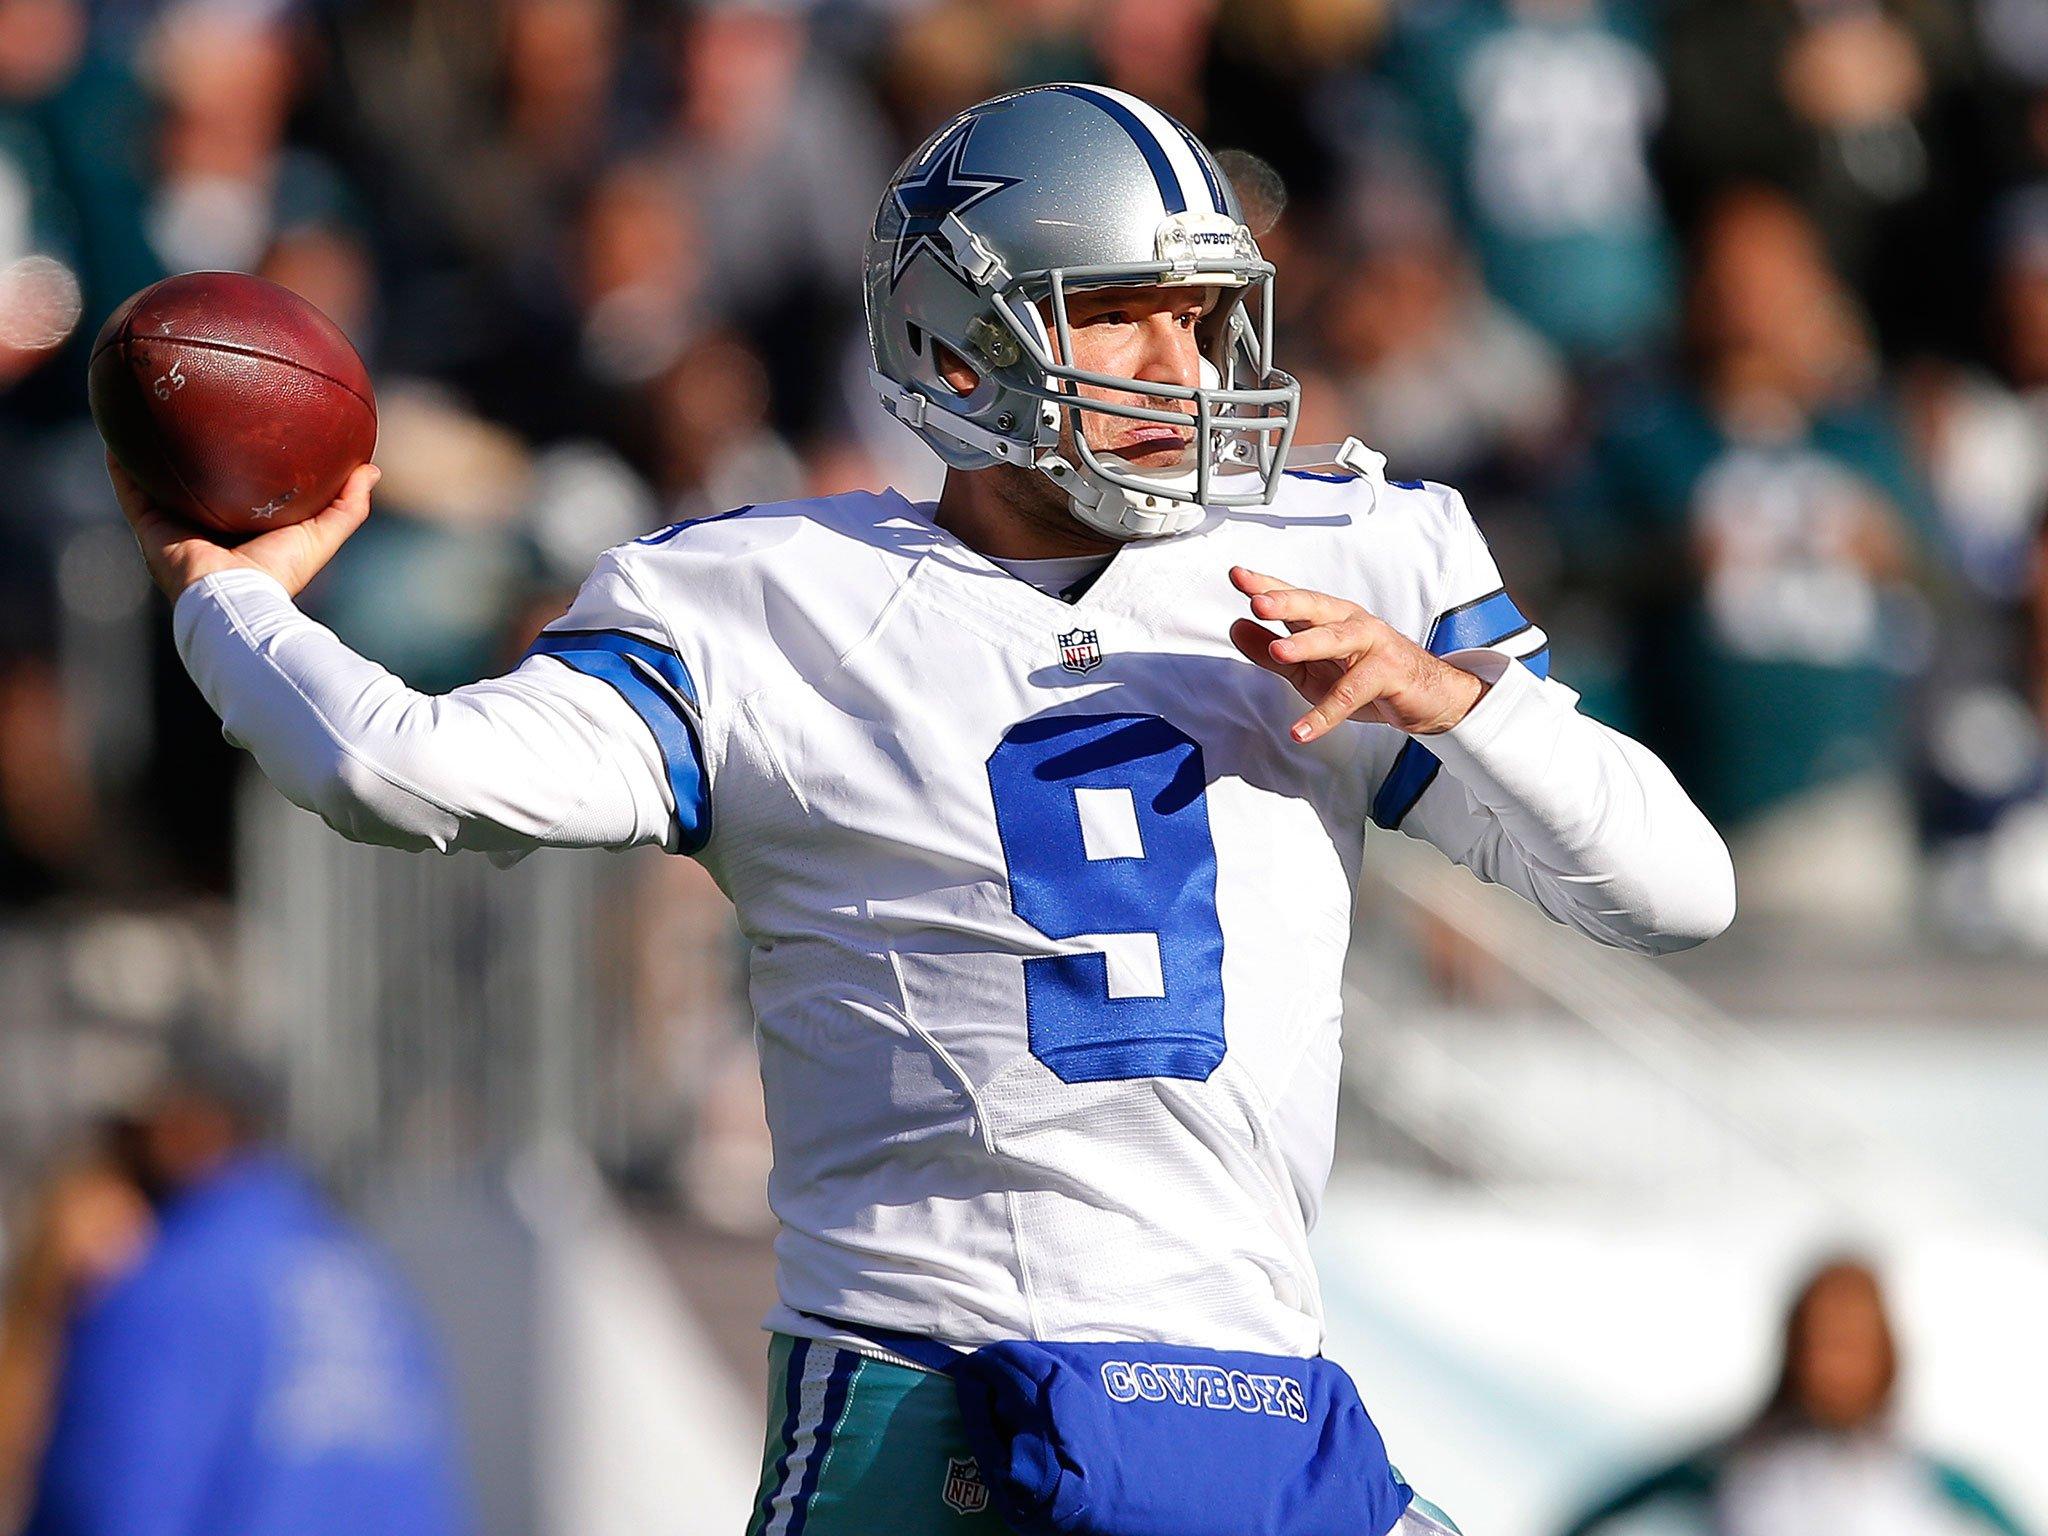 Tony Romo retires to end Dallas Cowboys career and move into TV